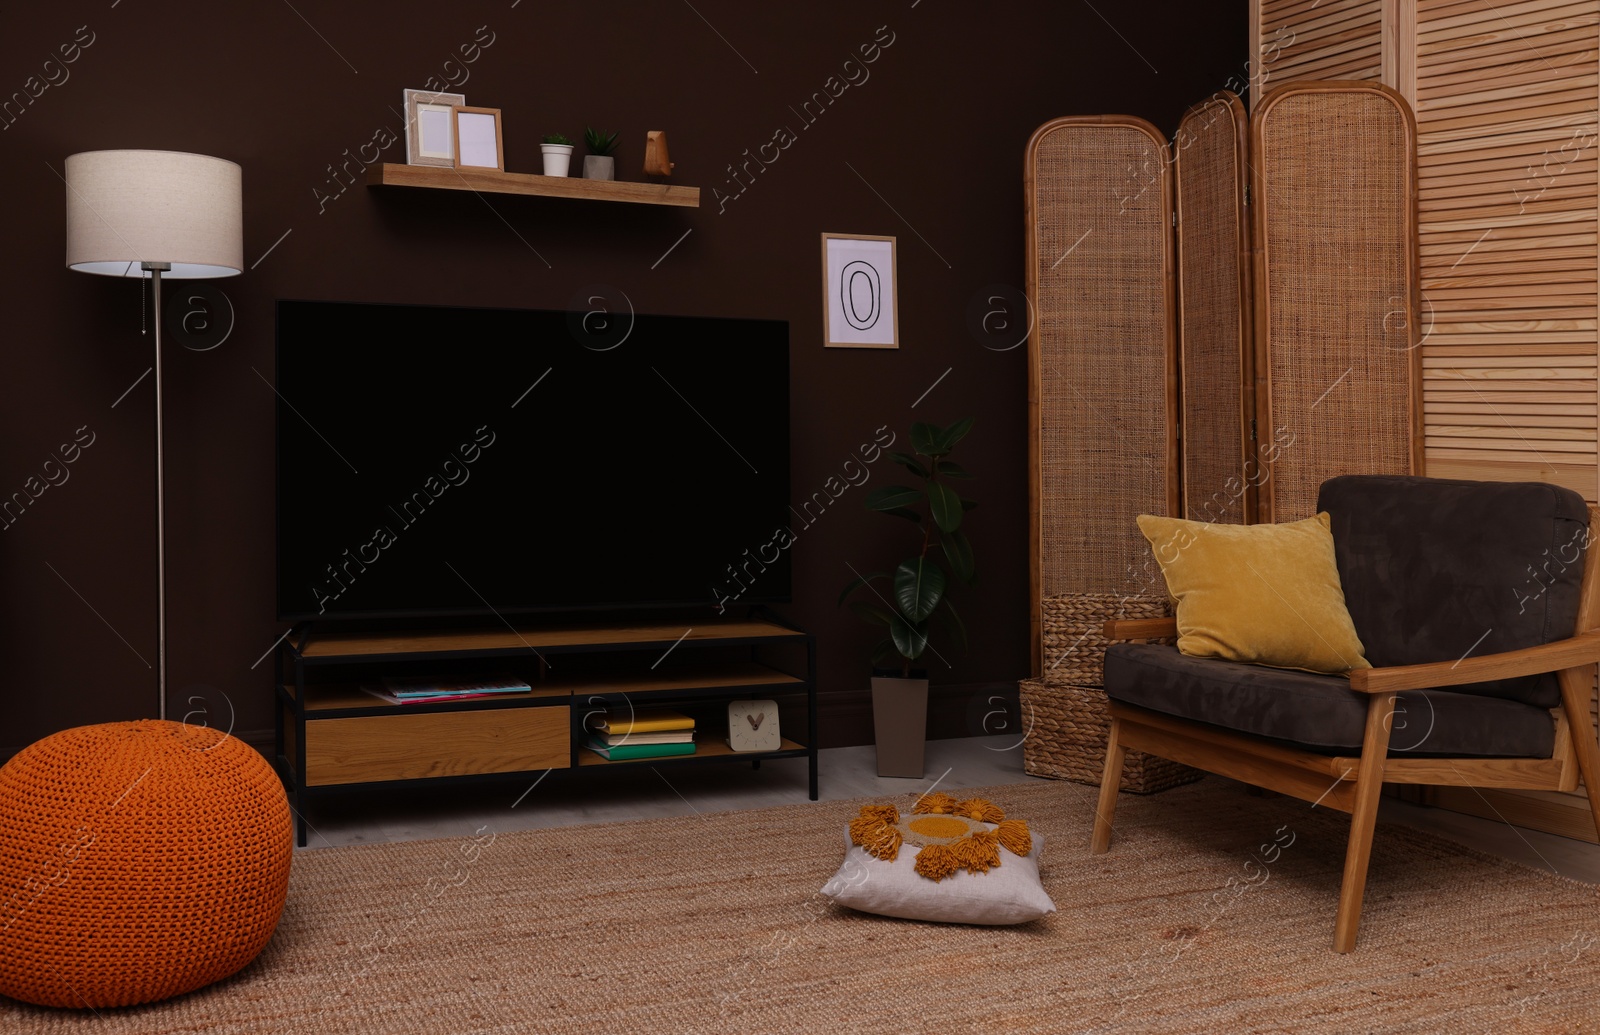 Photo of Modern TV on cabinet, stylish furniture and decorative elements in room. Interior design